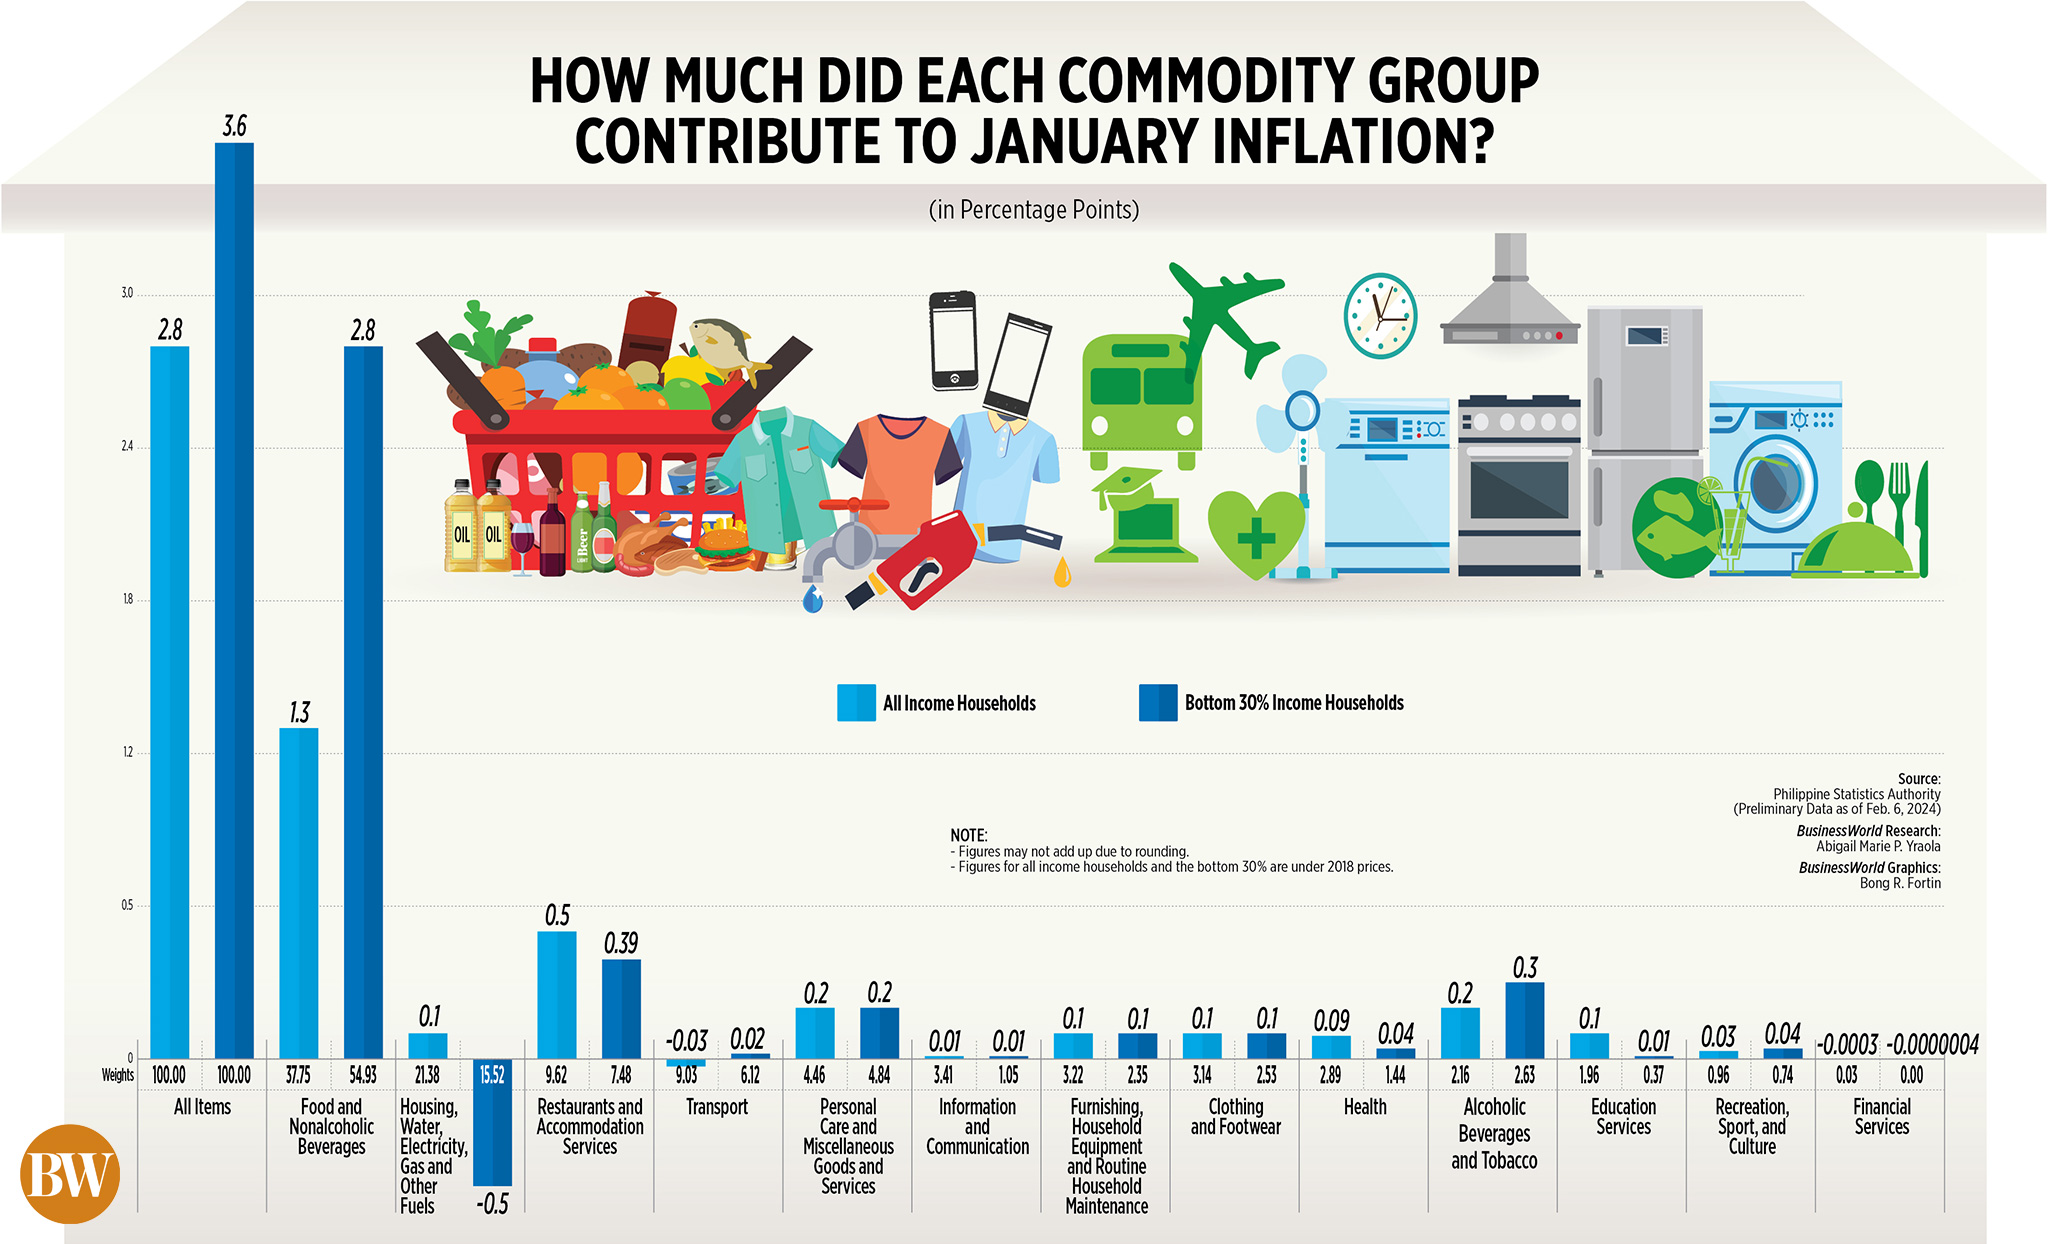 How much did each commodity group contribute to January inflation?